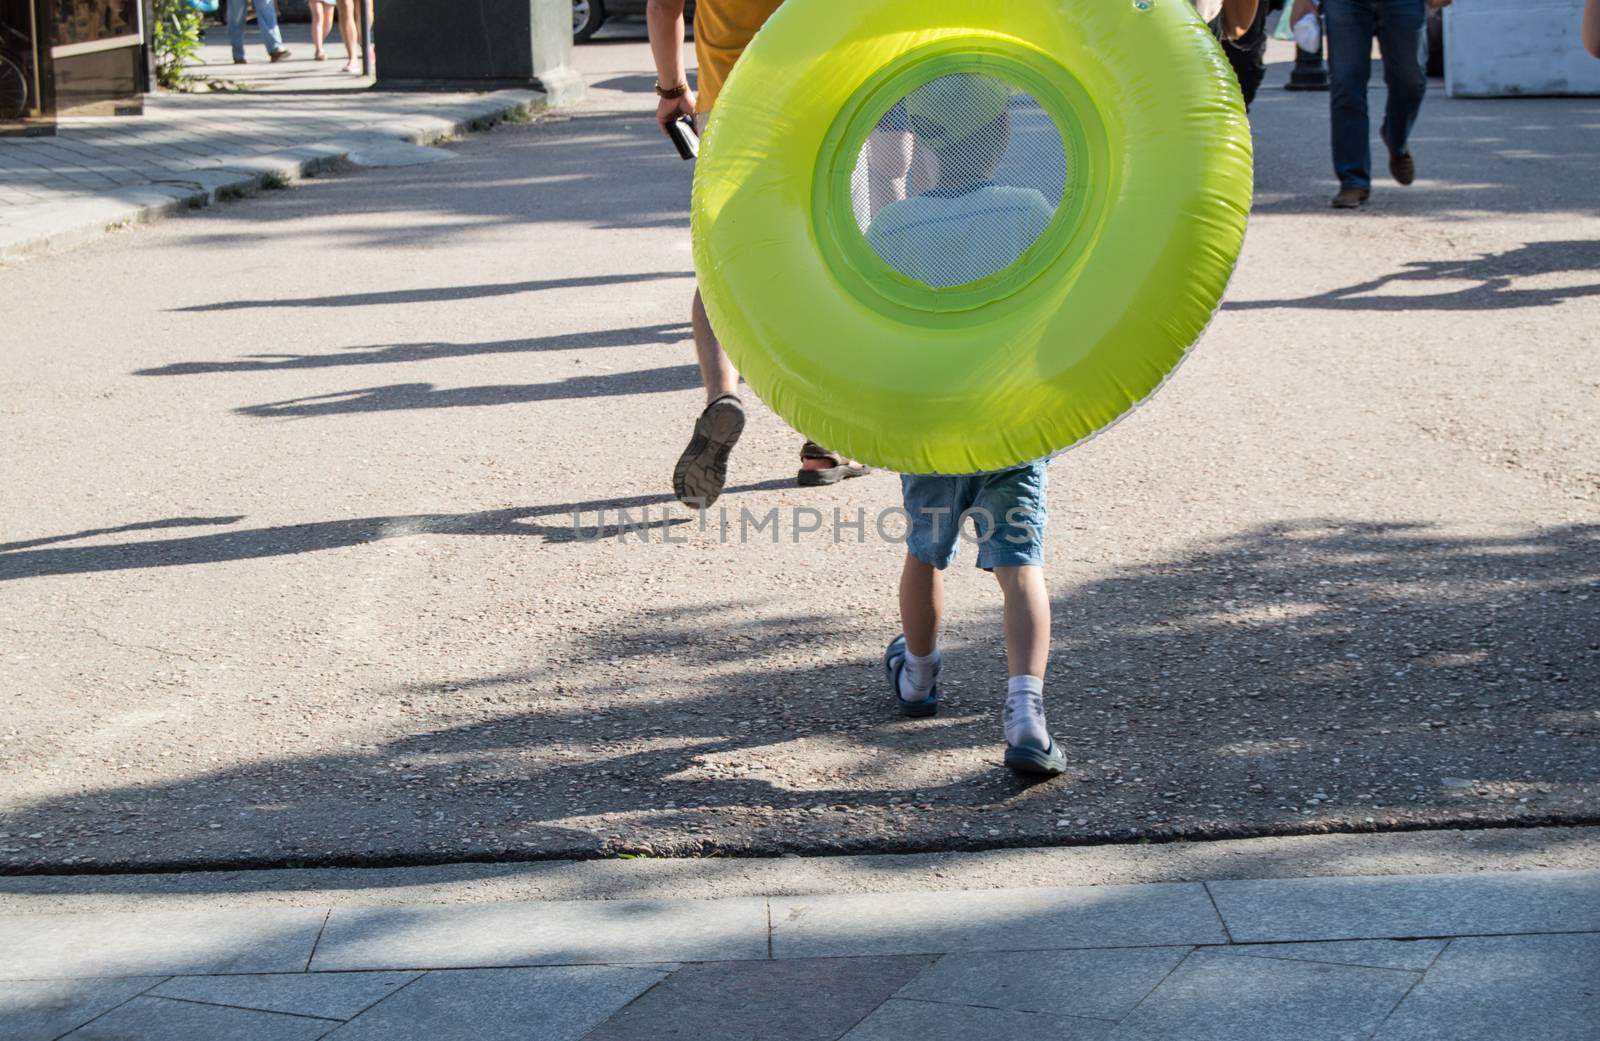 A boy pulls a large green buoy from behind by claire_lucia